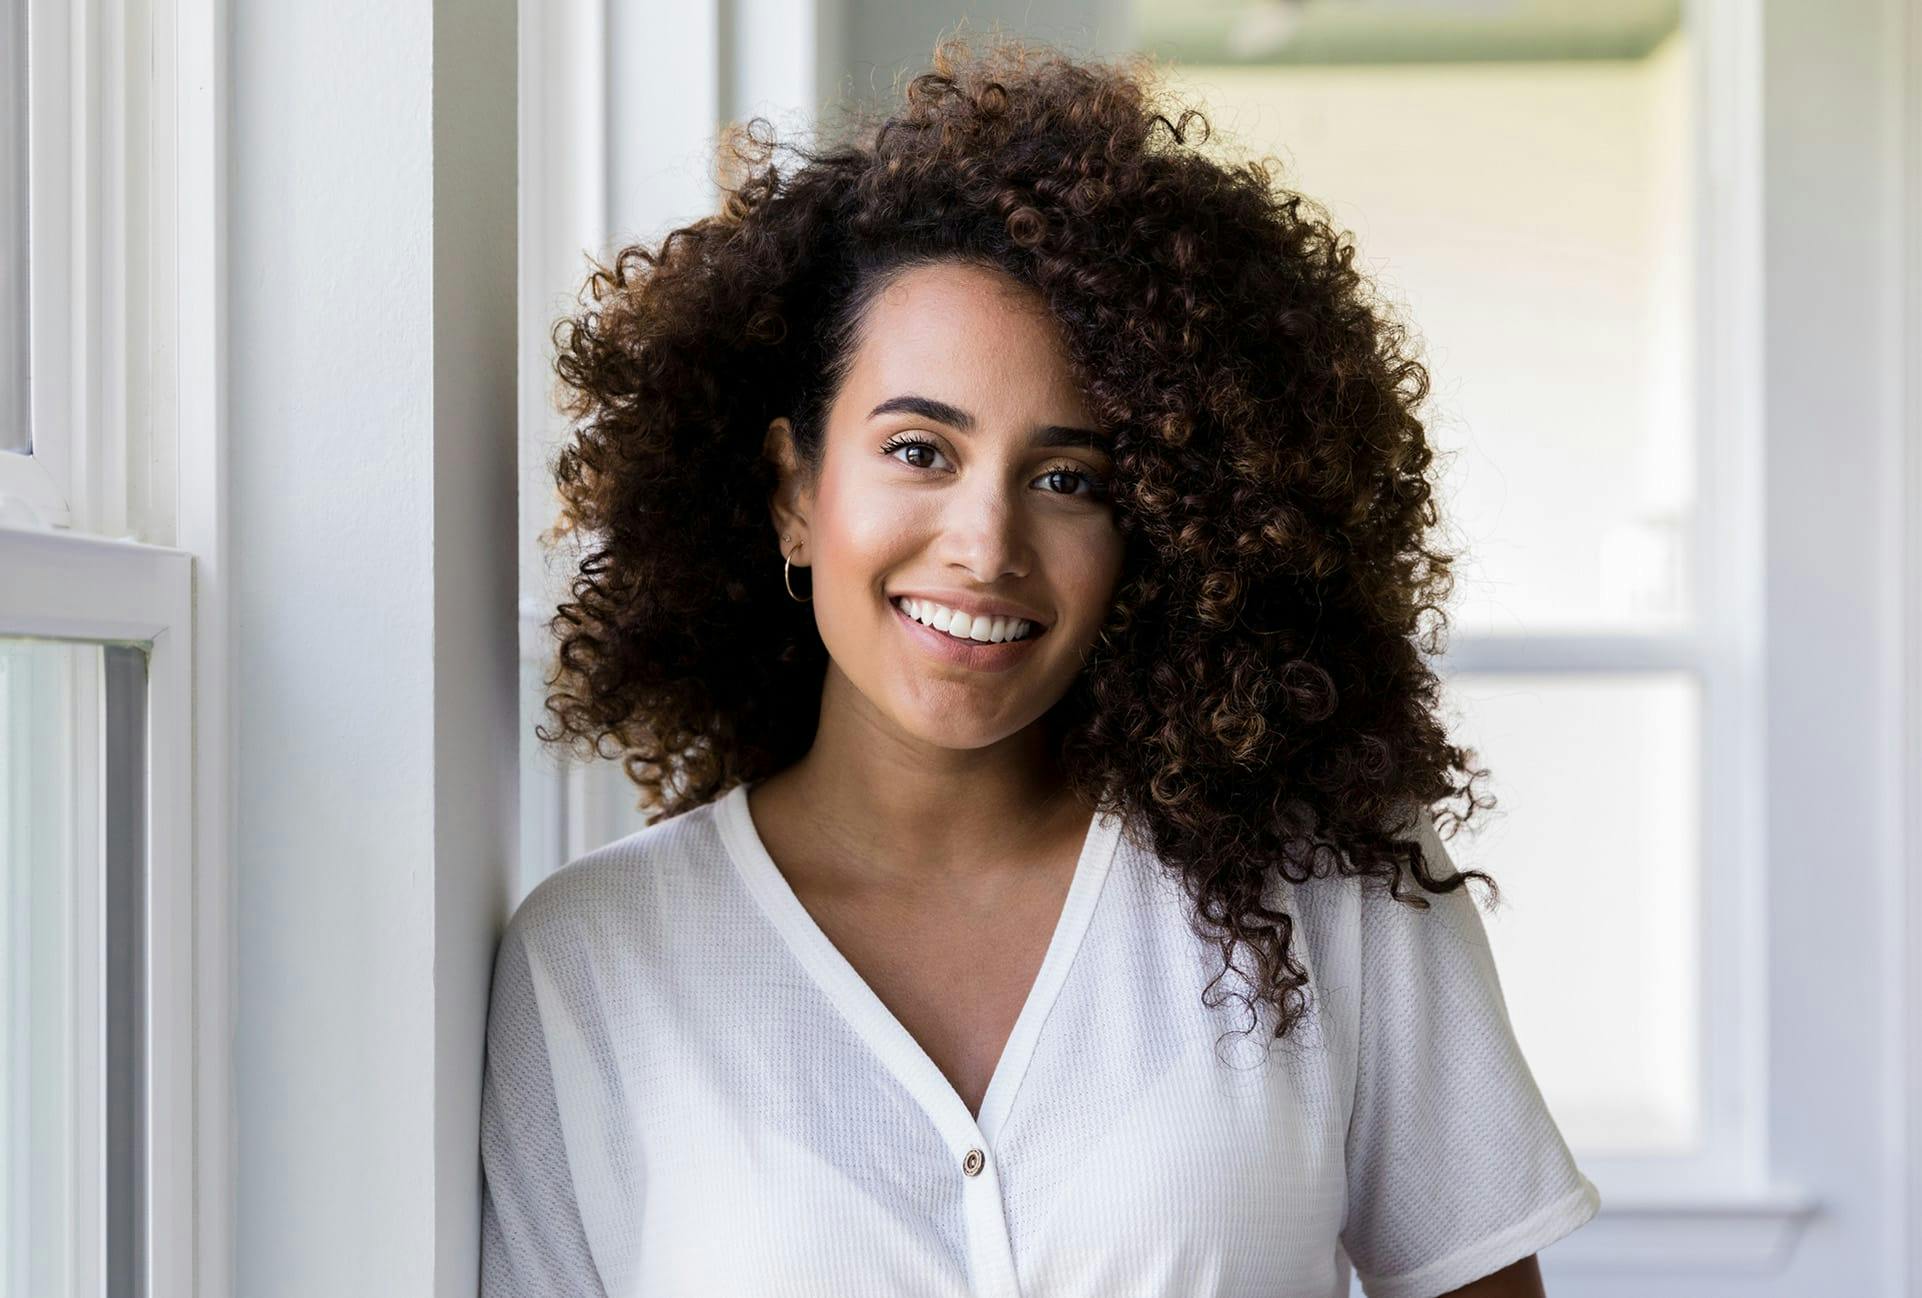 Woman with very curly brown hair